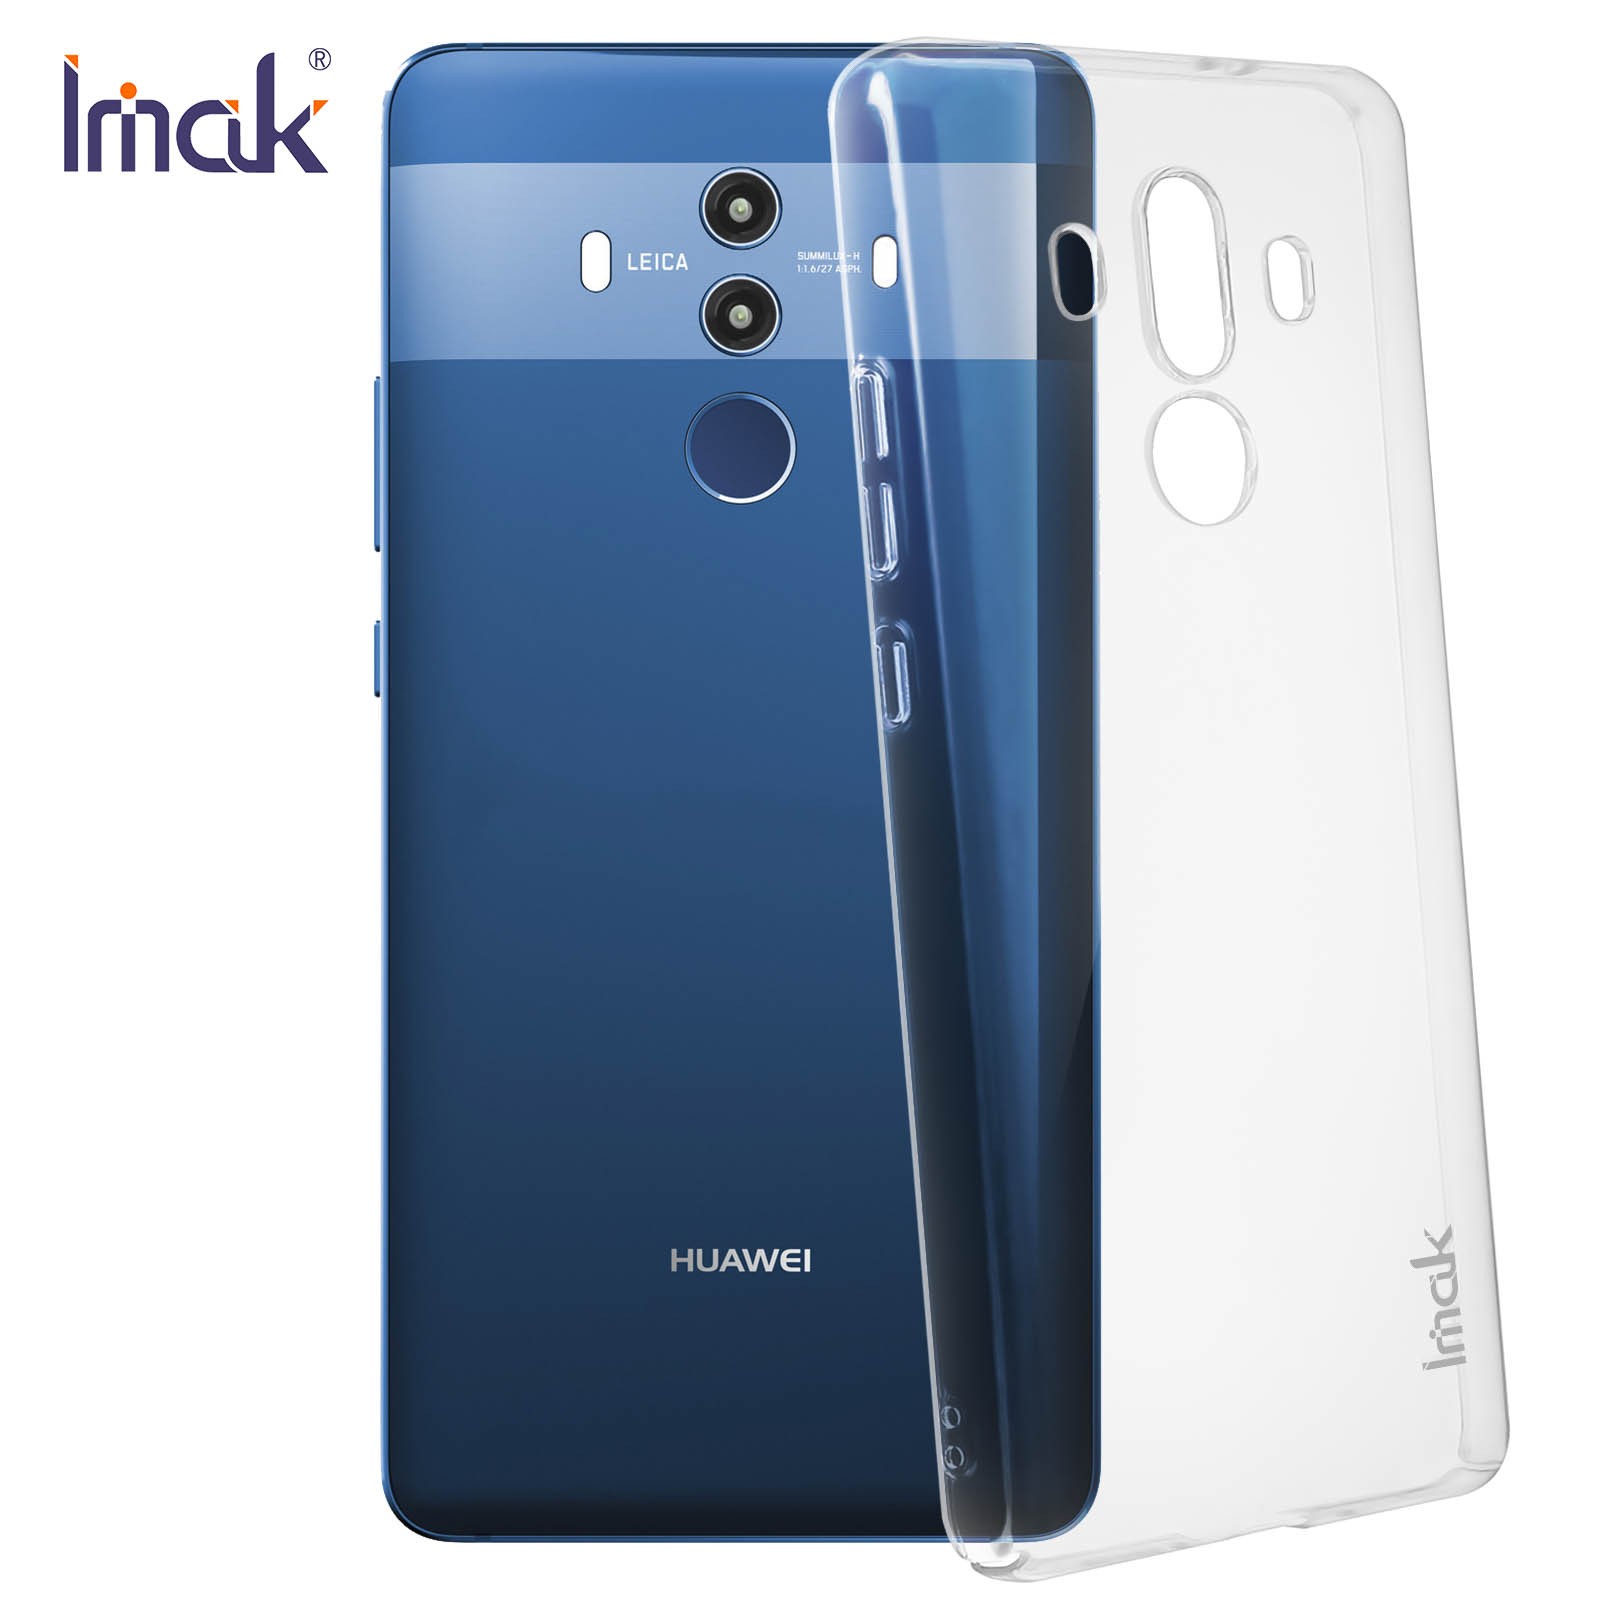 Coque personnalisée Huawei Mate 10 Pro